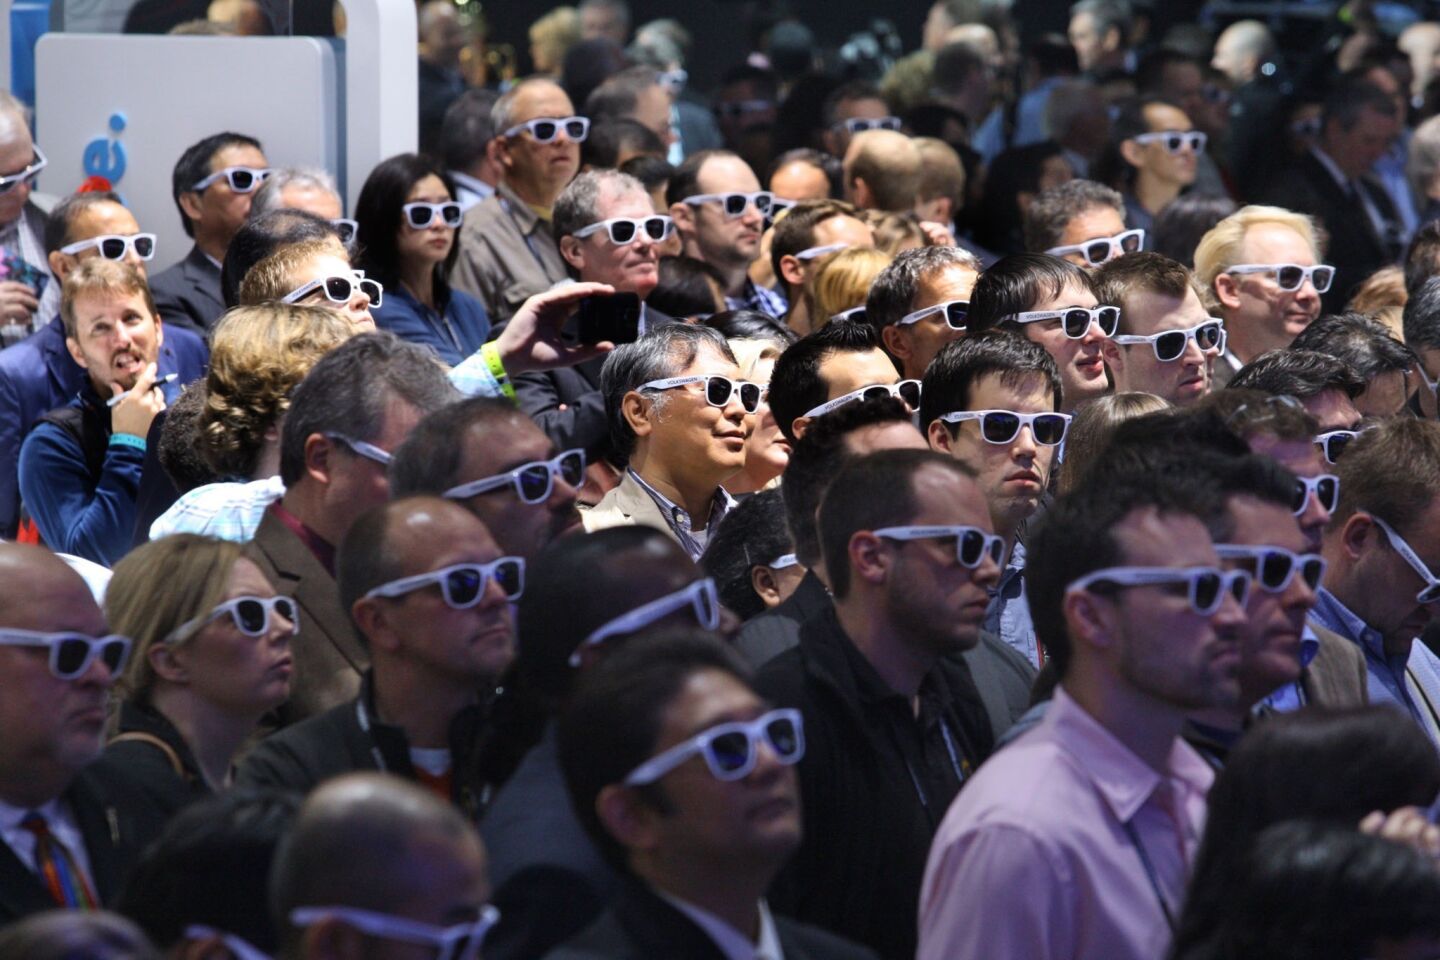 Members of the press wear polarizing sunglasses at the premiere of the Volkswagen Beetle convertible at the L.A. Auto Show at the Los Angeles Convention Center in Los Angeles on November 28, 2012. The glasses helped the audience better see projections during the cars presentation. The Beetle convertible will be available in three special editions upon launch in December 2012.